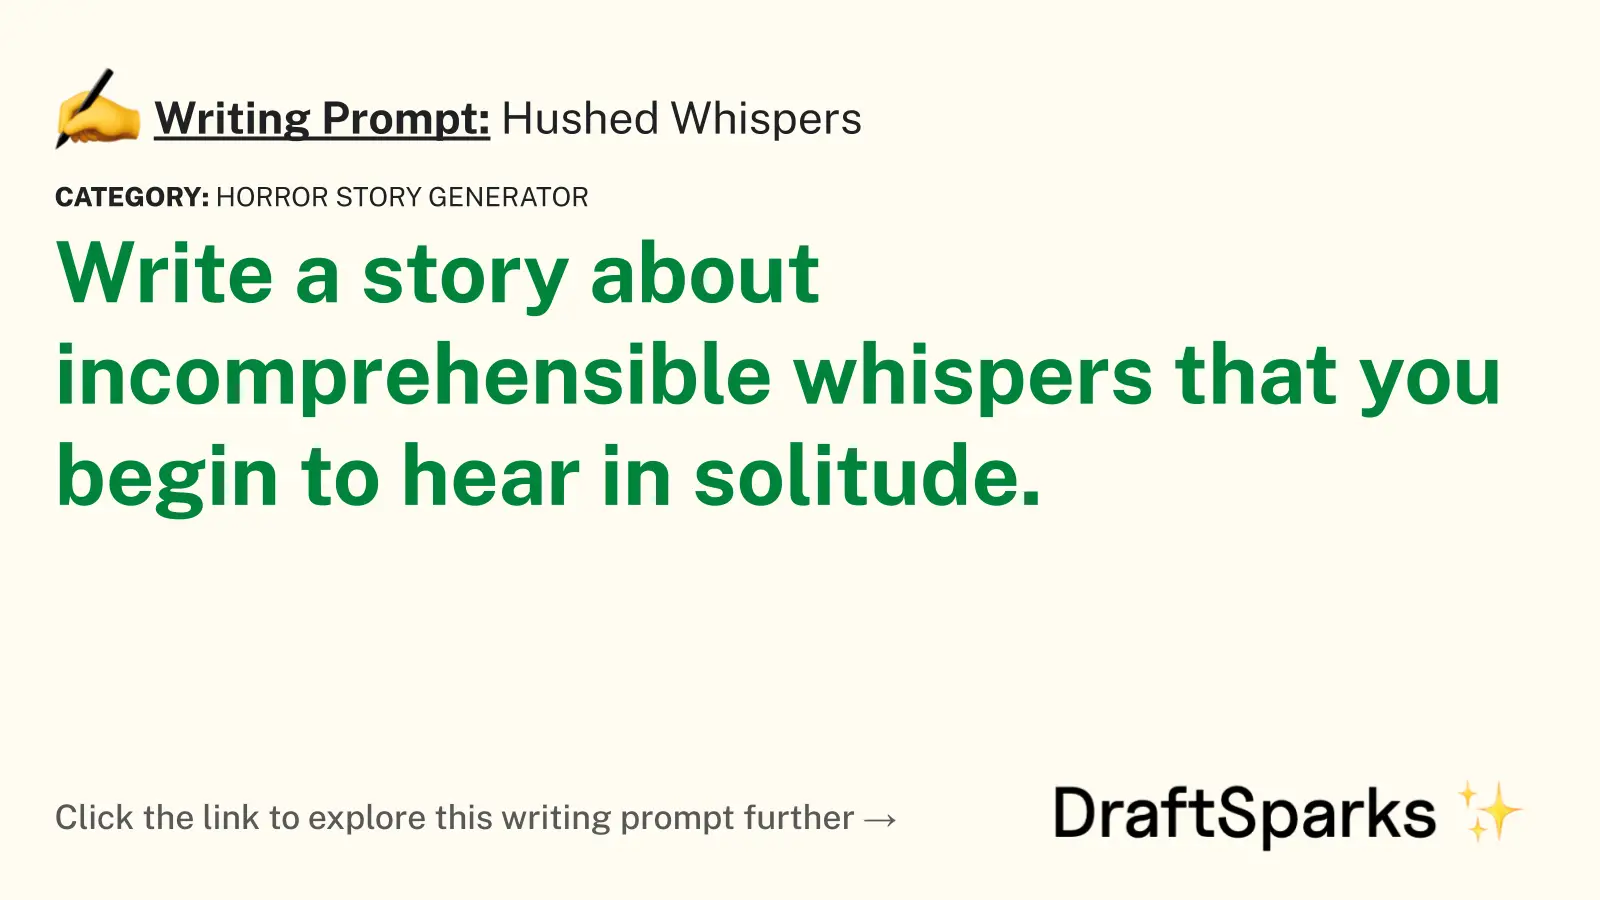 Hushed Whispers